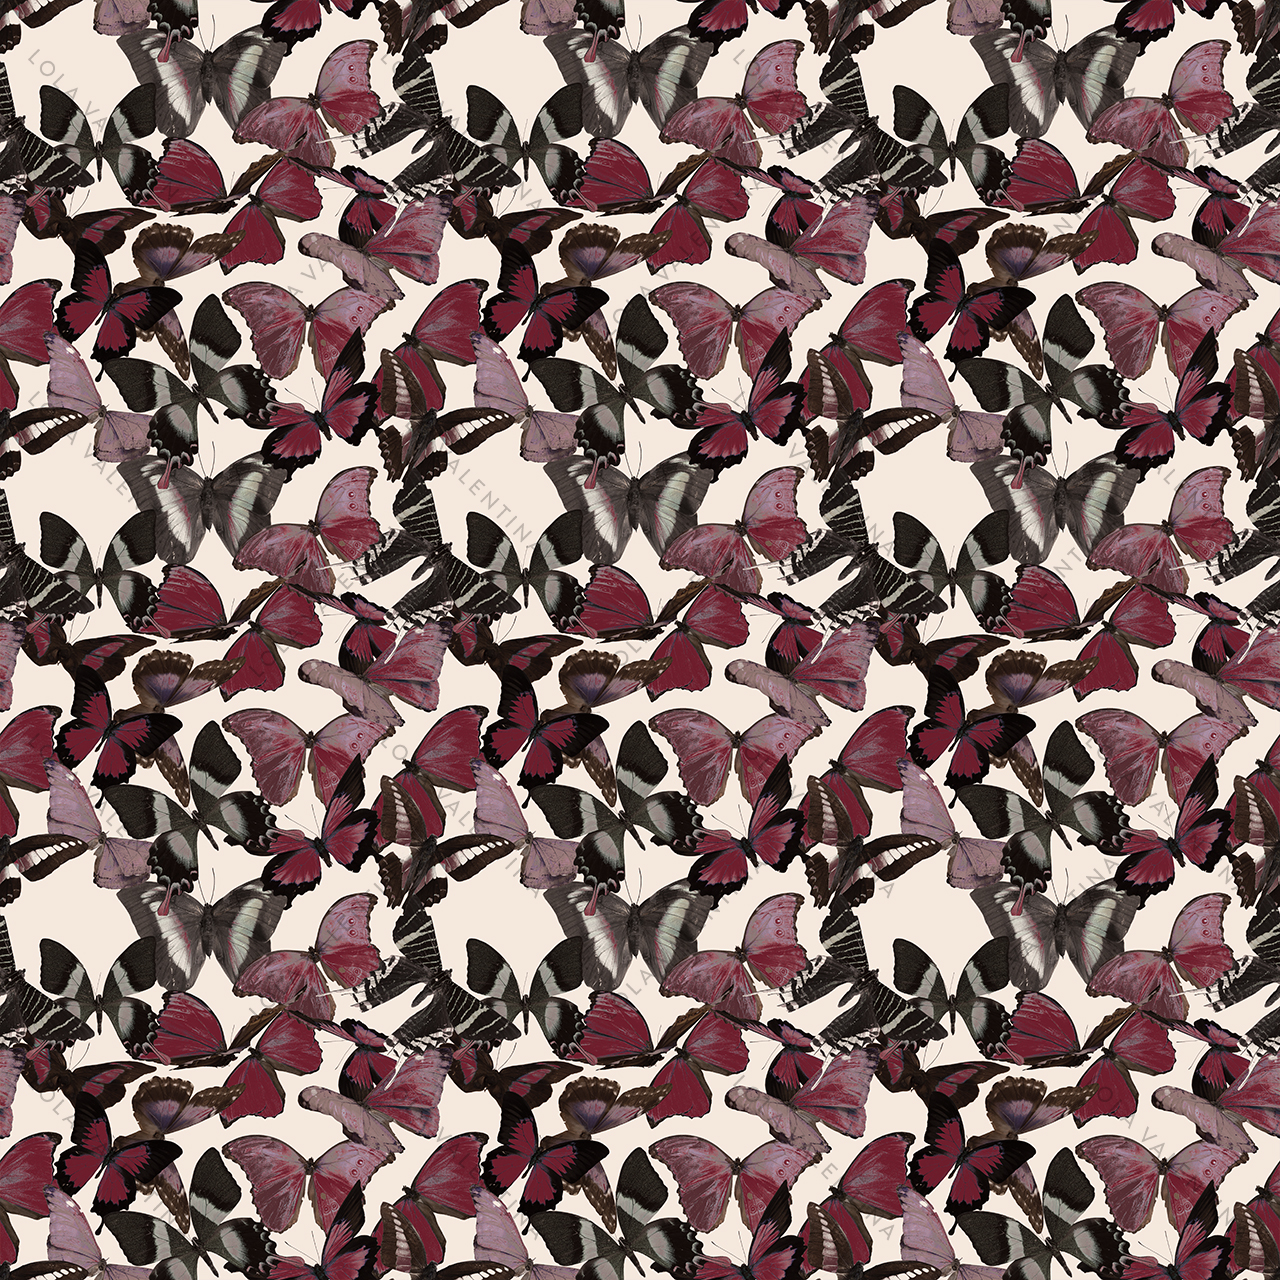 Maroon Cream Morphini Pattern 30x30 From Butterfly Collection- Lola Valentina High End Table Linen Rental